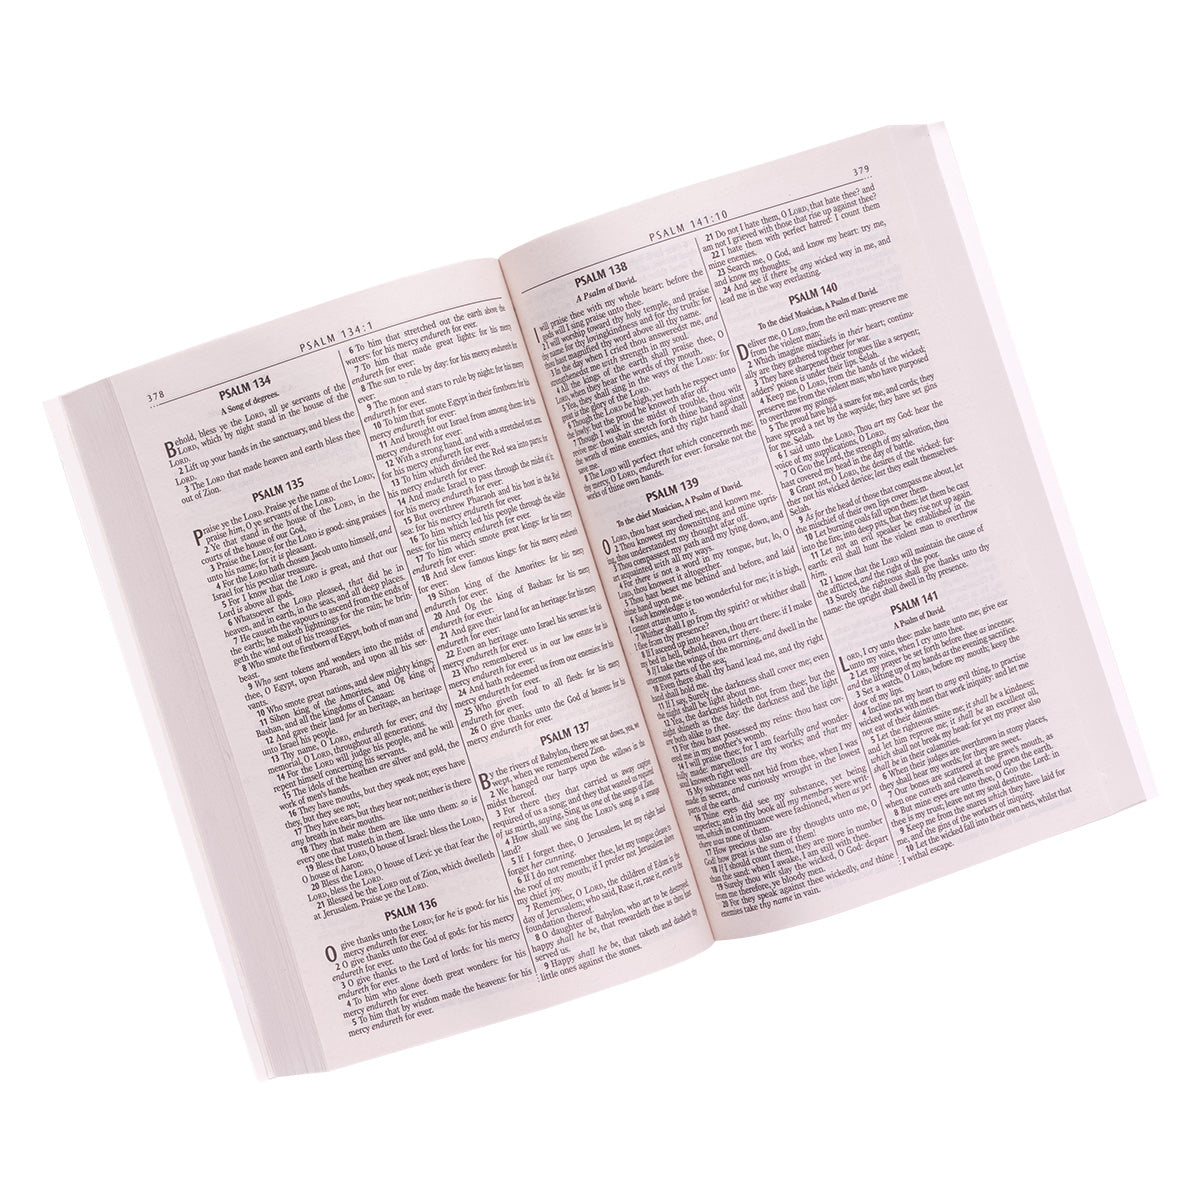 Silver-Grey Damask Softcover King James Version Outreach Bible - The Christian Gift Company